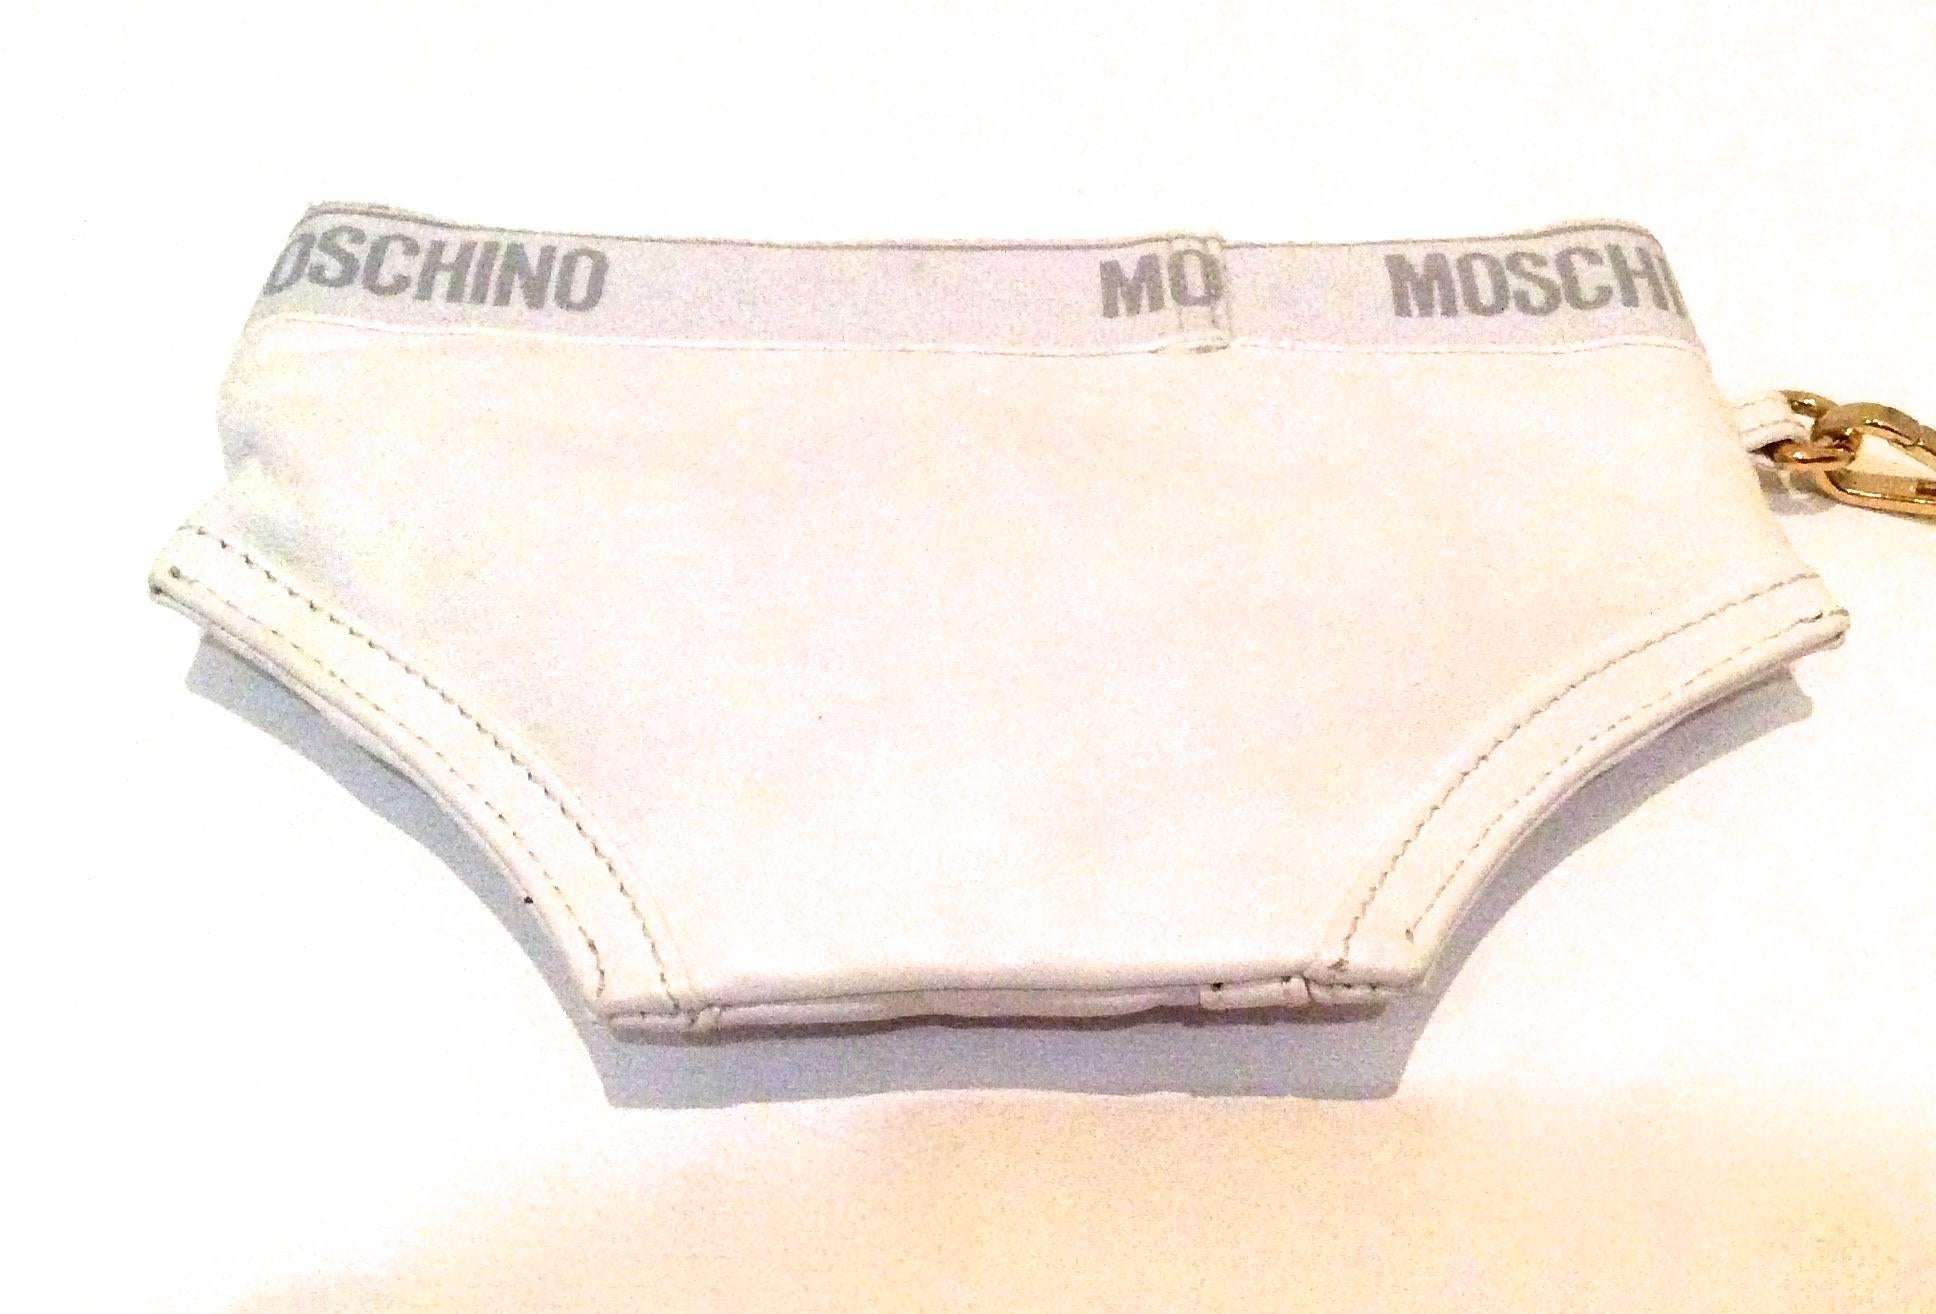 This Moschino Underwear bag is another magnificent work by the craftsmen at Moschino. It is a leather bag that is modeled to resemble a pair of white underwear brief shorts. This bag is sold out in most boutiques and is in extremely high